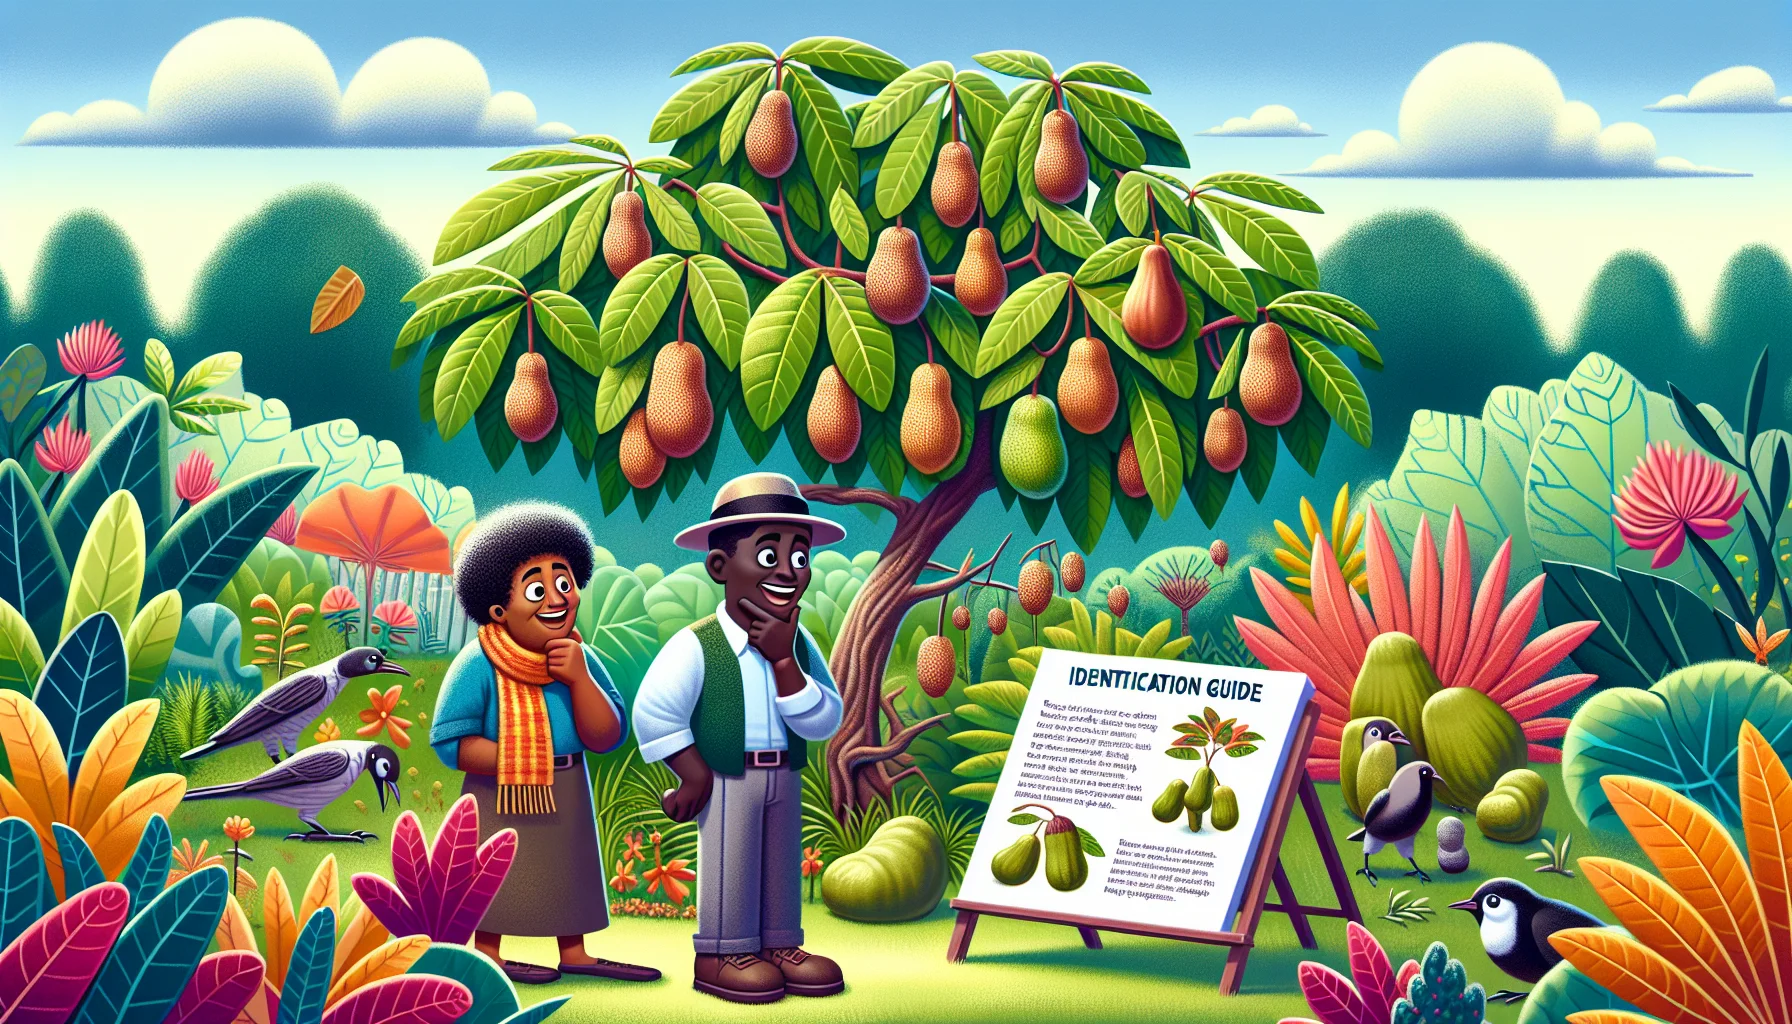 Imagine a quirky scenario set in an abundant garden. Off to one side, a large, well-established paw paw tree stands majestically. There's a helpful guide positioned nearby, bursting with color and details about the tree's identification features including its broad, drooping leaves and distinctive fruit. Lively characters, a Hispanic woman and a Black man, are in awe of the large, uniquely shaped fruits hanging from the branches. To add a humorous touch, a group of birds seem to be imitating humans, eagerly studying the guide, plotting to gorge on the paw paw fruits. This cheerful and amusing image encourages a love for gardening.